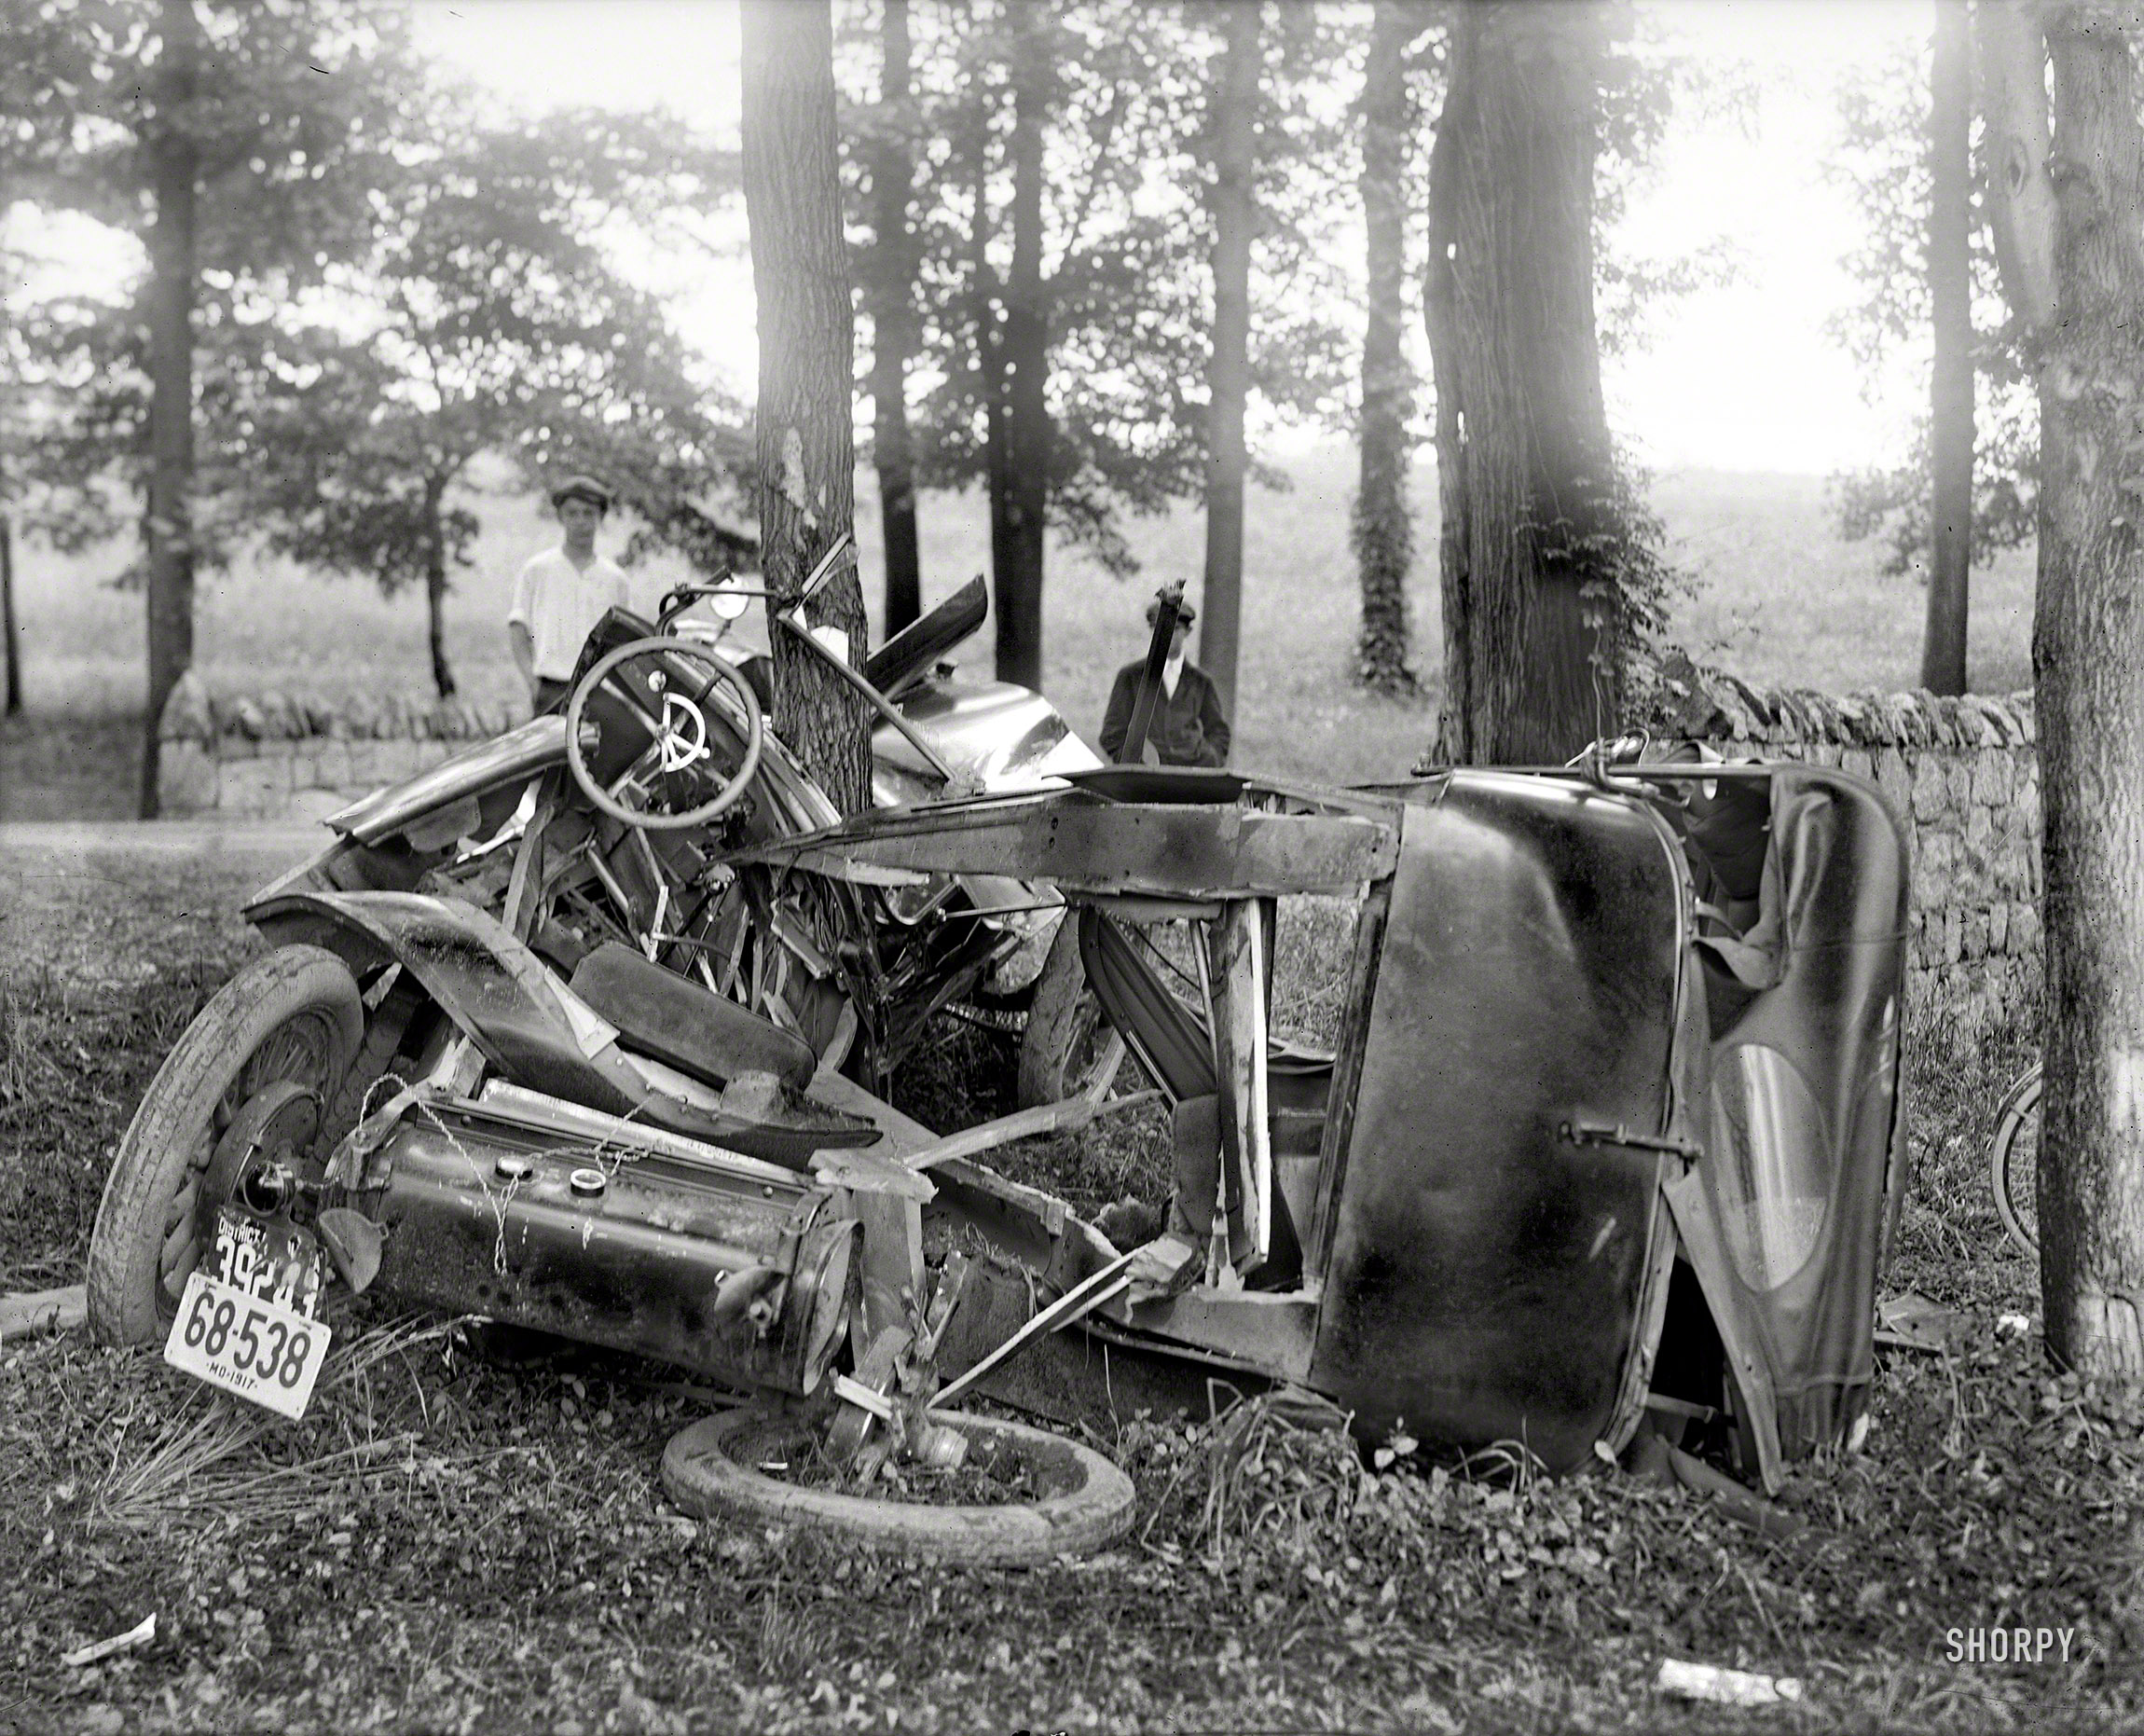 Washington, D.C., or vicinity. "Auto wreck." Tree 1, Car 0. Another of National Photo's "auto wreck" plates from 1917. 8x10 glass negative. View full size.